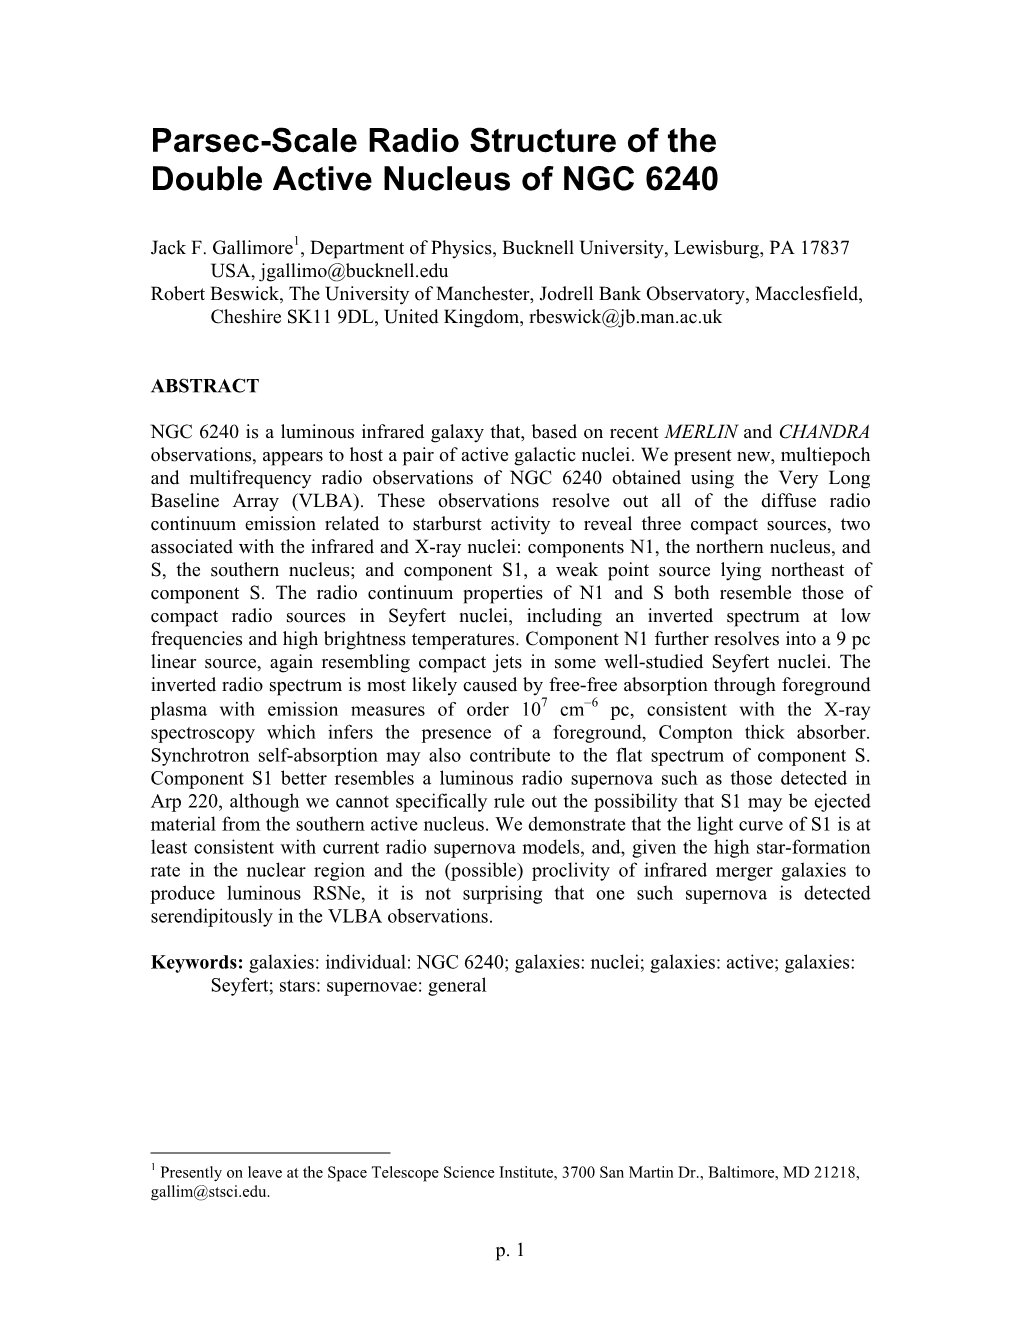 Parsec-Scale Radio Structure of the Double Active Nucleus of NGC 6240